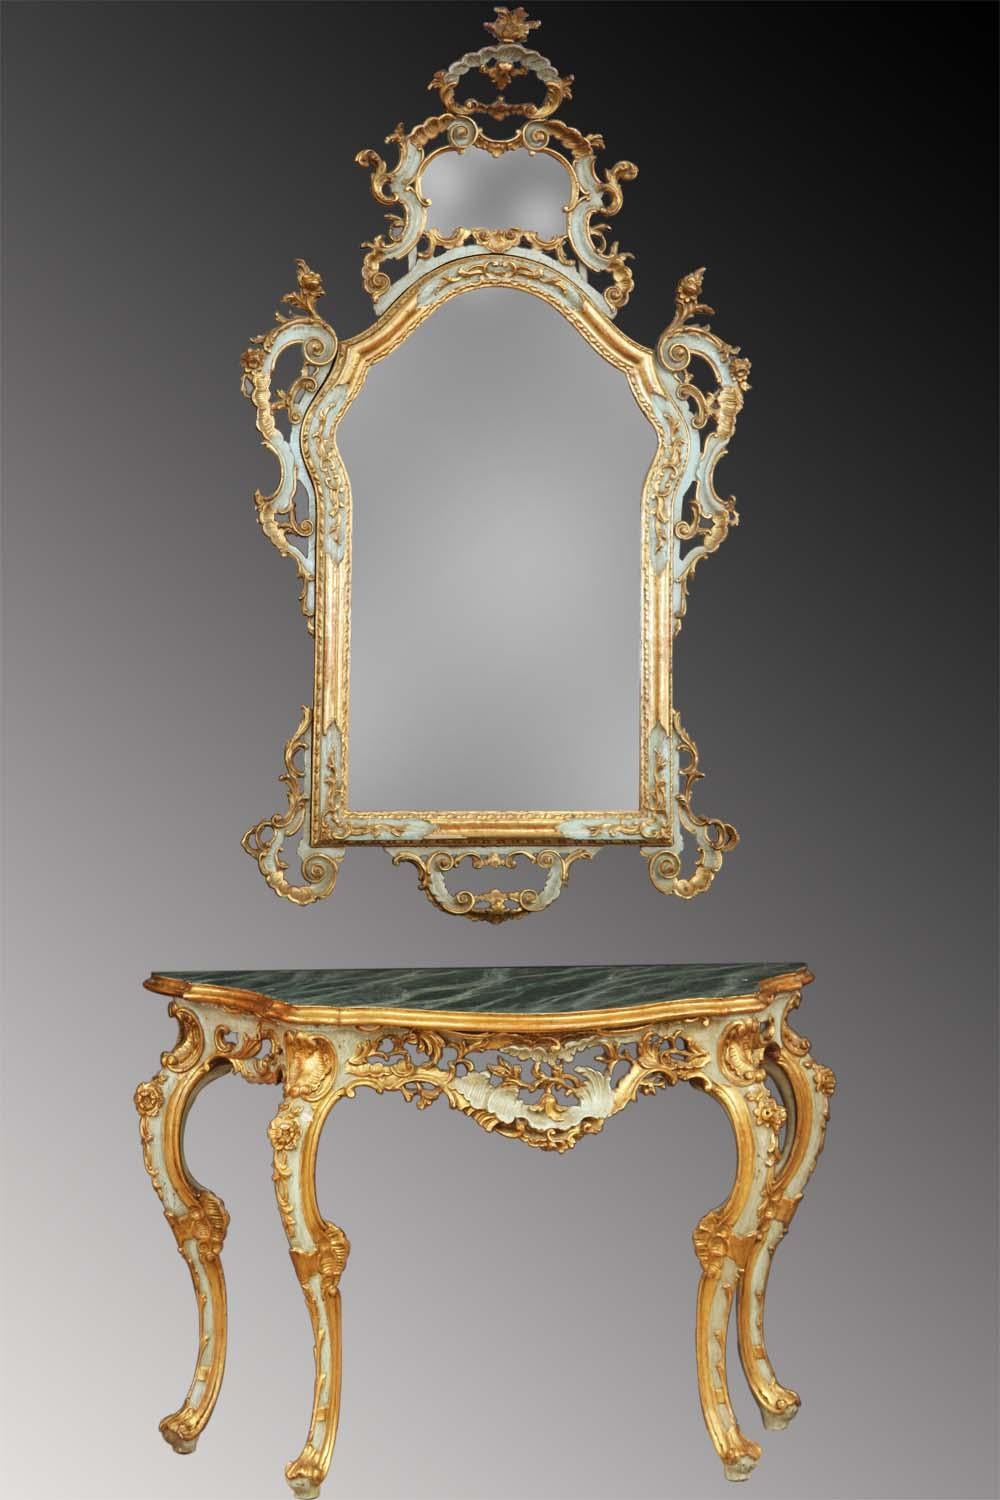 Mirror console table in Louis XV Rococo style, carved, lacquered and gilded. Venetian provenance.

Period: late 1800s 
Although this is a 19th-century reproduction the quality of the materials and the execution technique is of great quality.
W